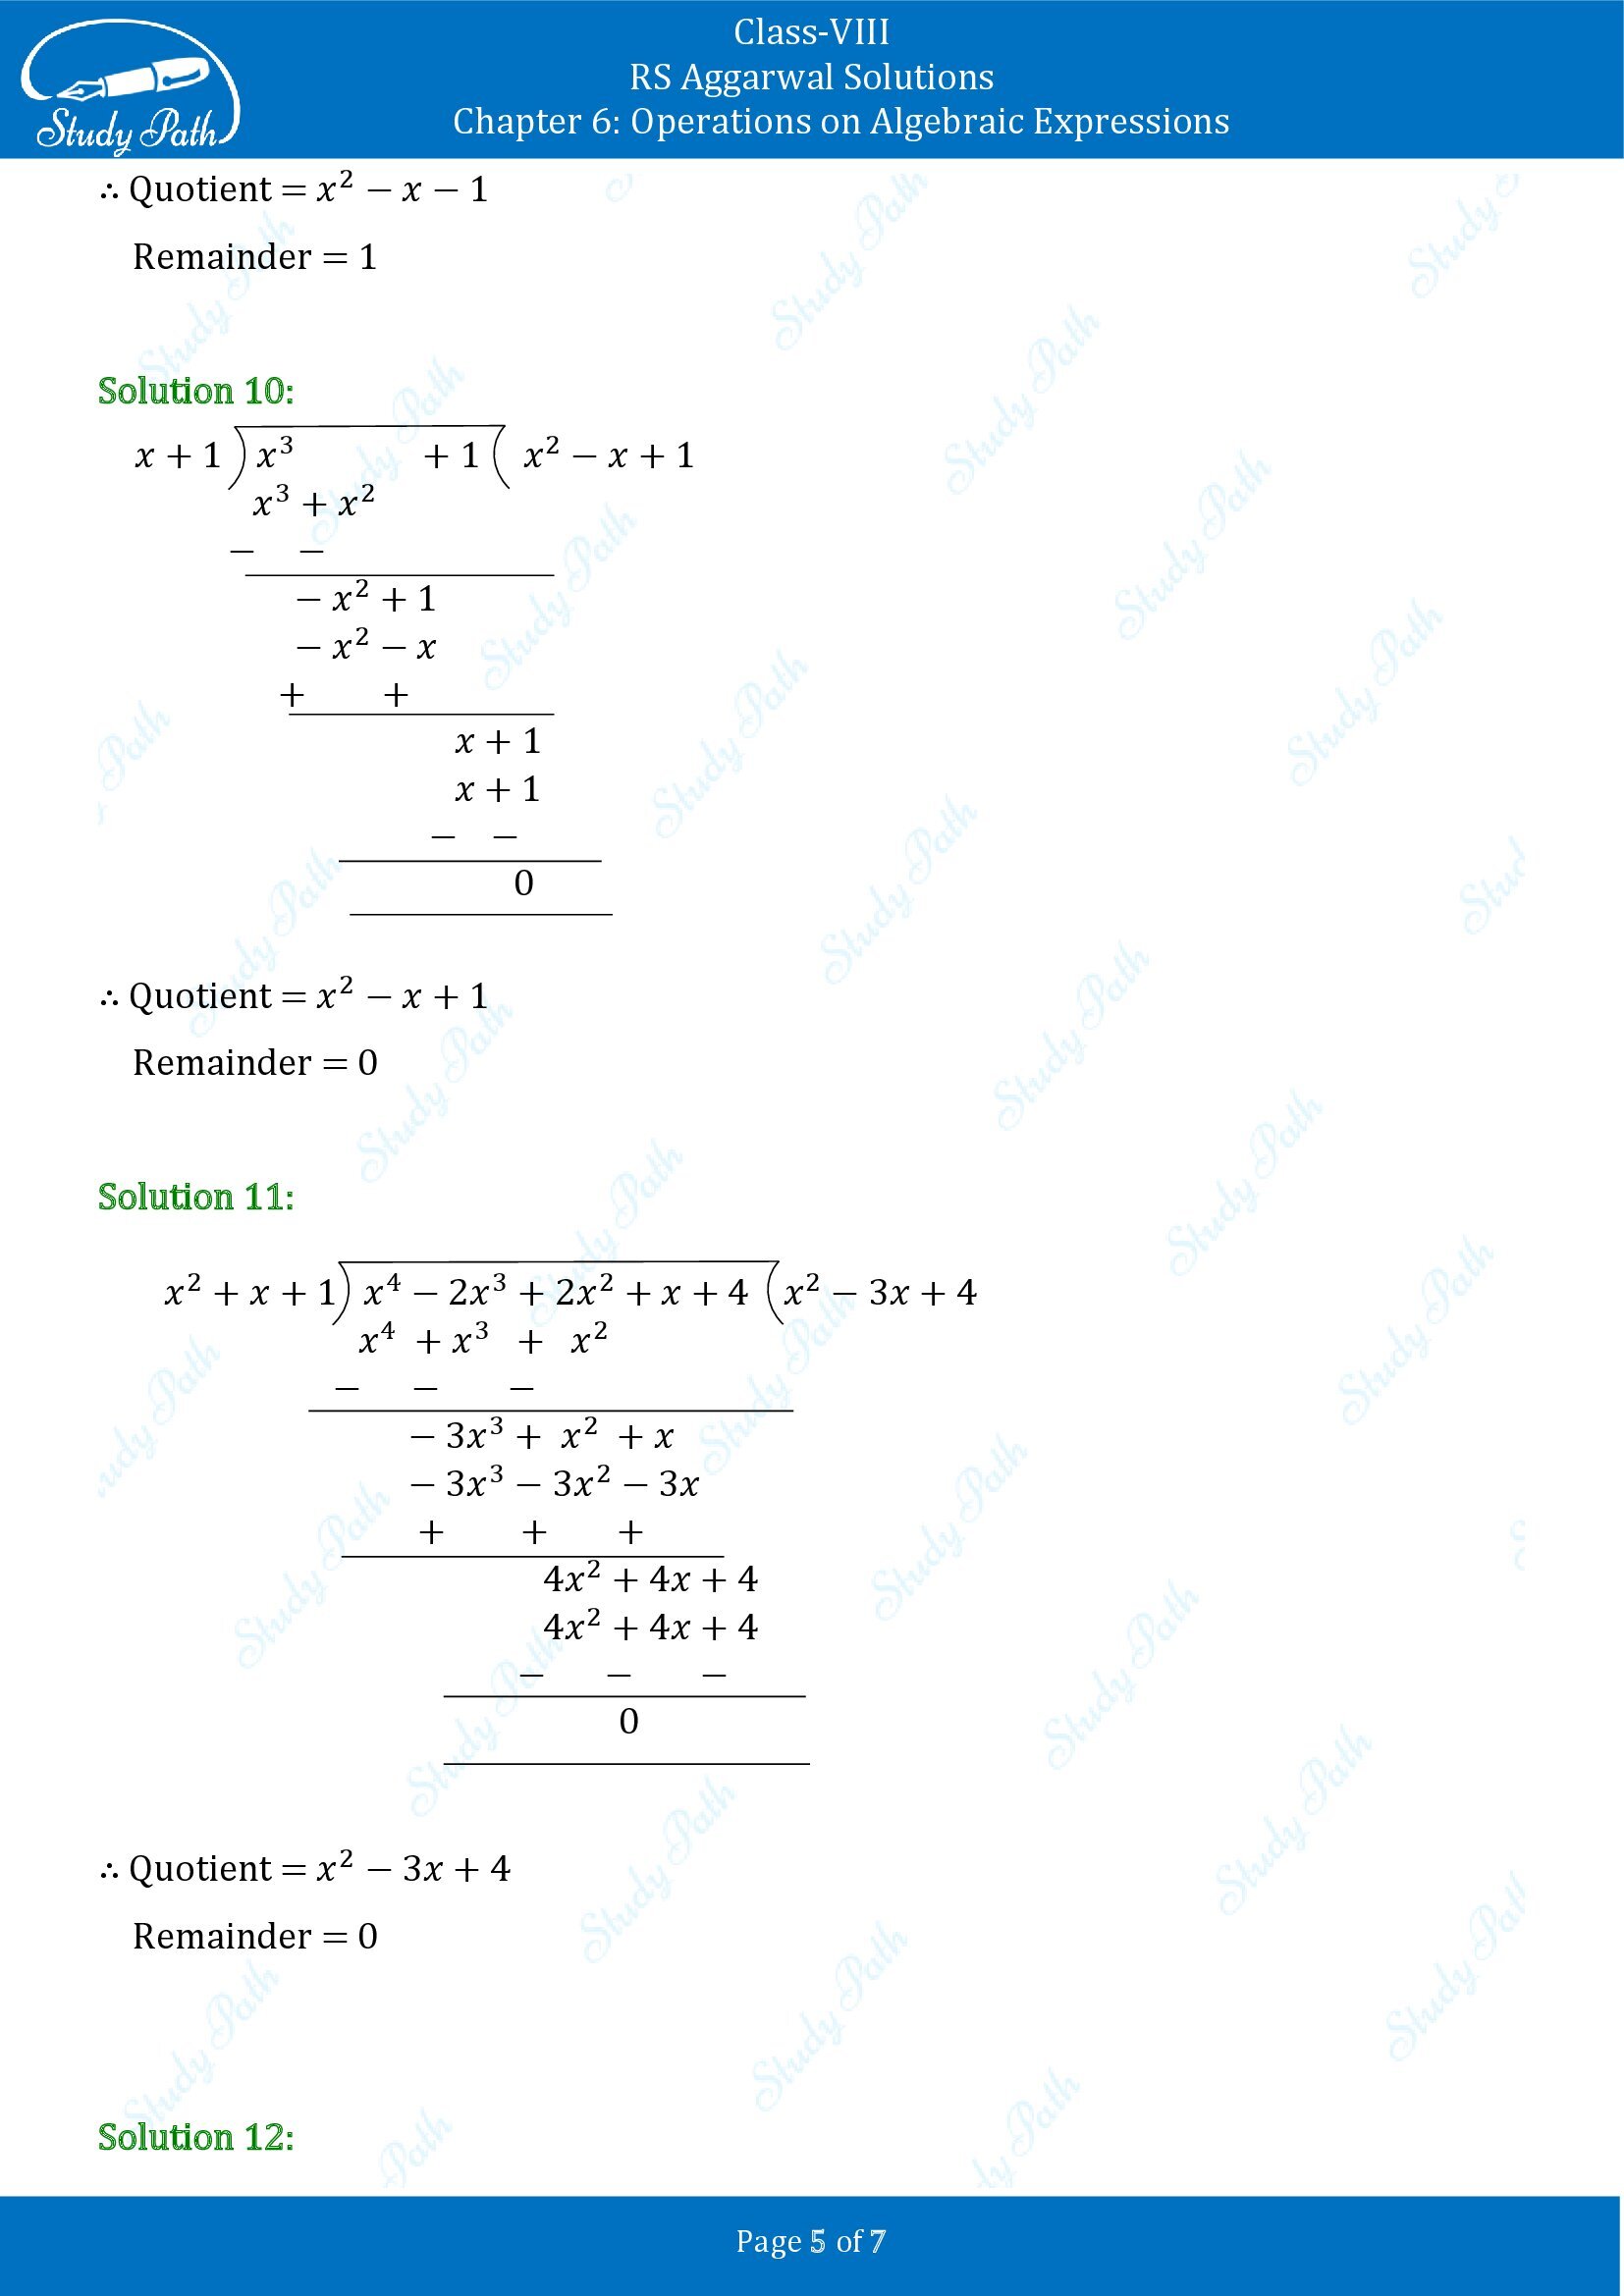 RS Aggarwal Solutions Class 8 Chapter 6 Operations on Algebraic Expressions Exercise 6C 00005